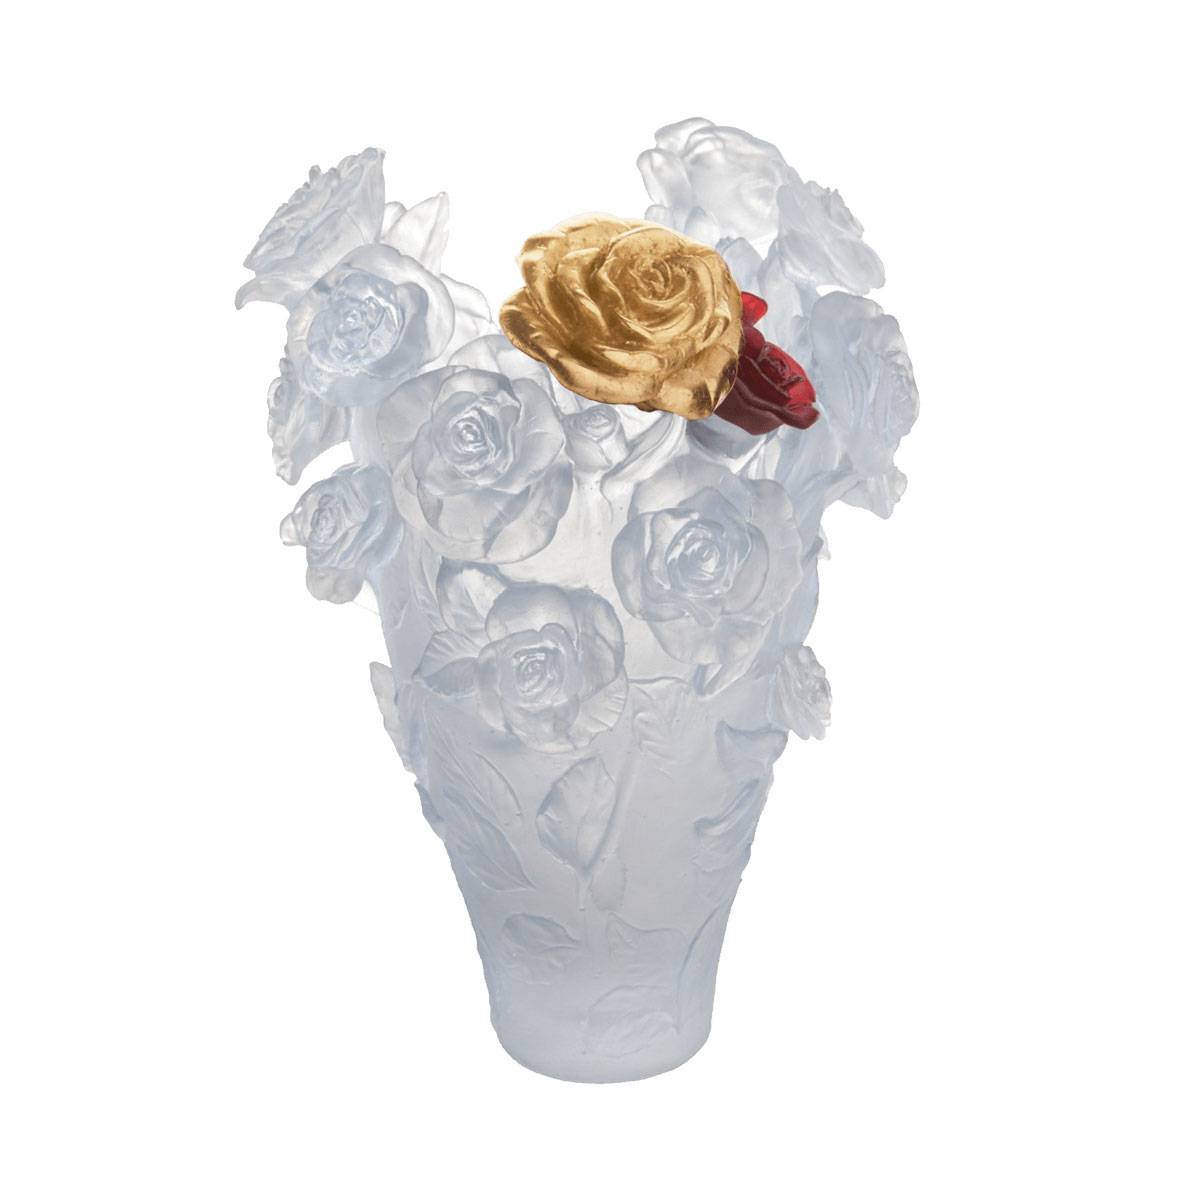 Daum Magnum Rose Passion Vase in White with Red and Gold Flowers, Limited Edition